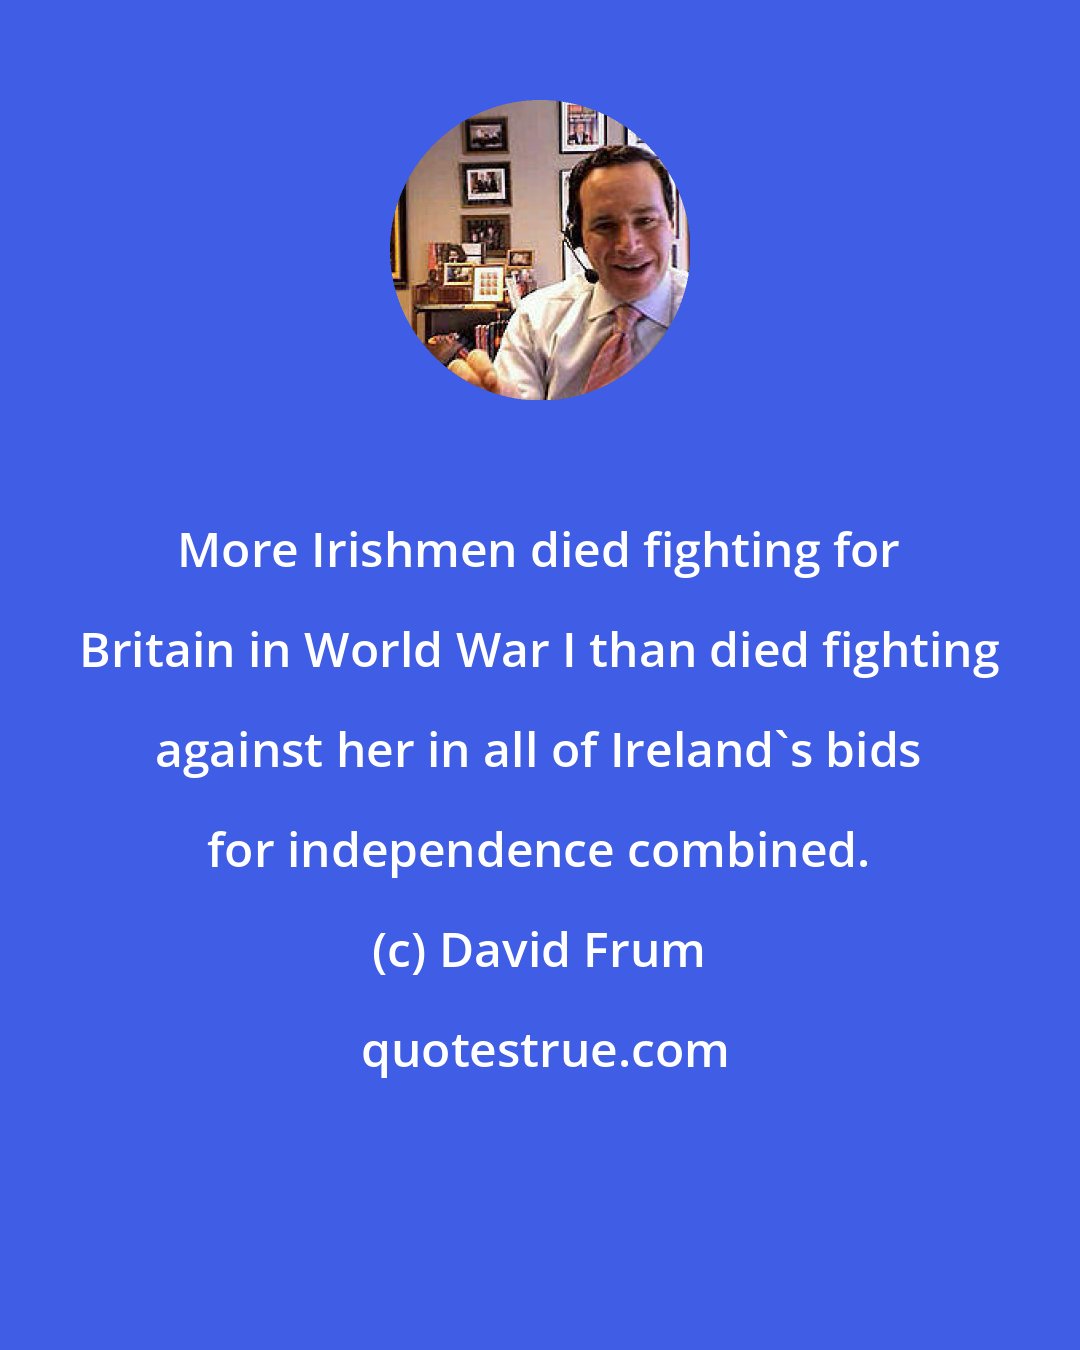 David Frum: More Irishmen died fighting for Britain in World War I than died fighting against her in all of Ireland's bids for independence combined.